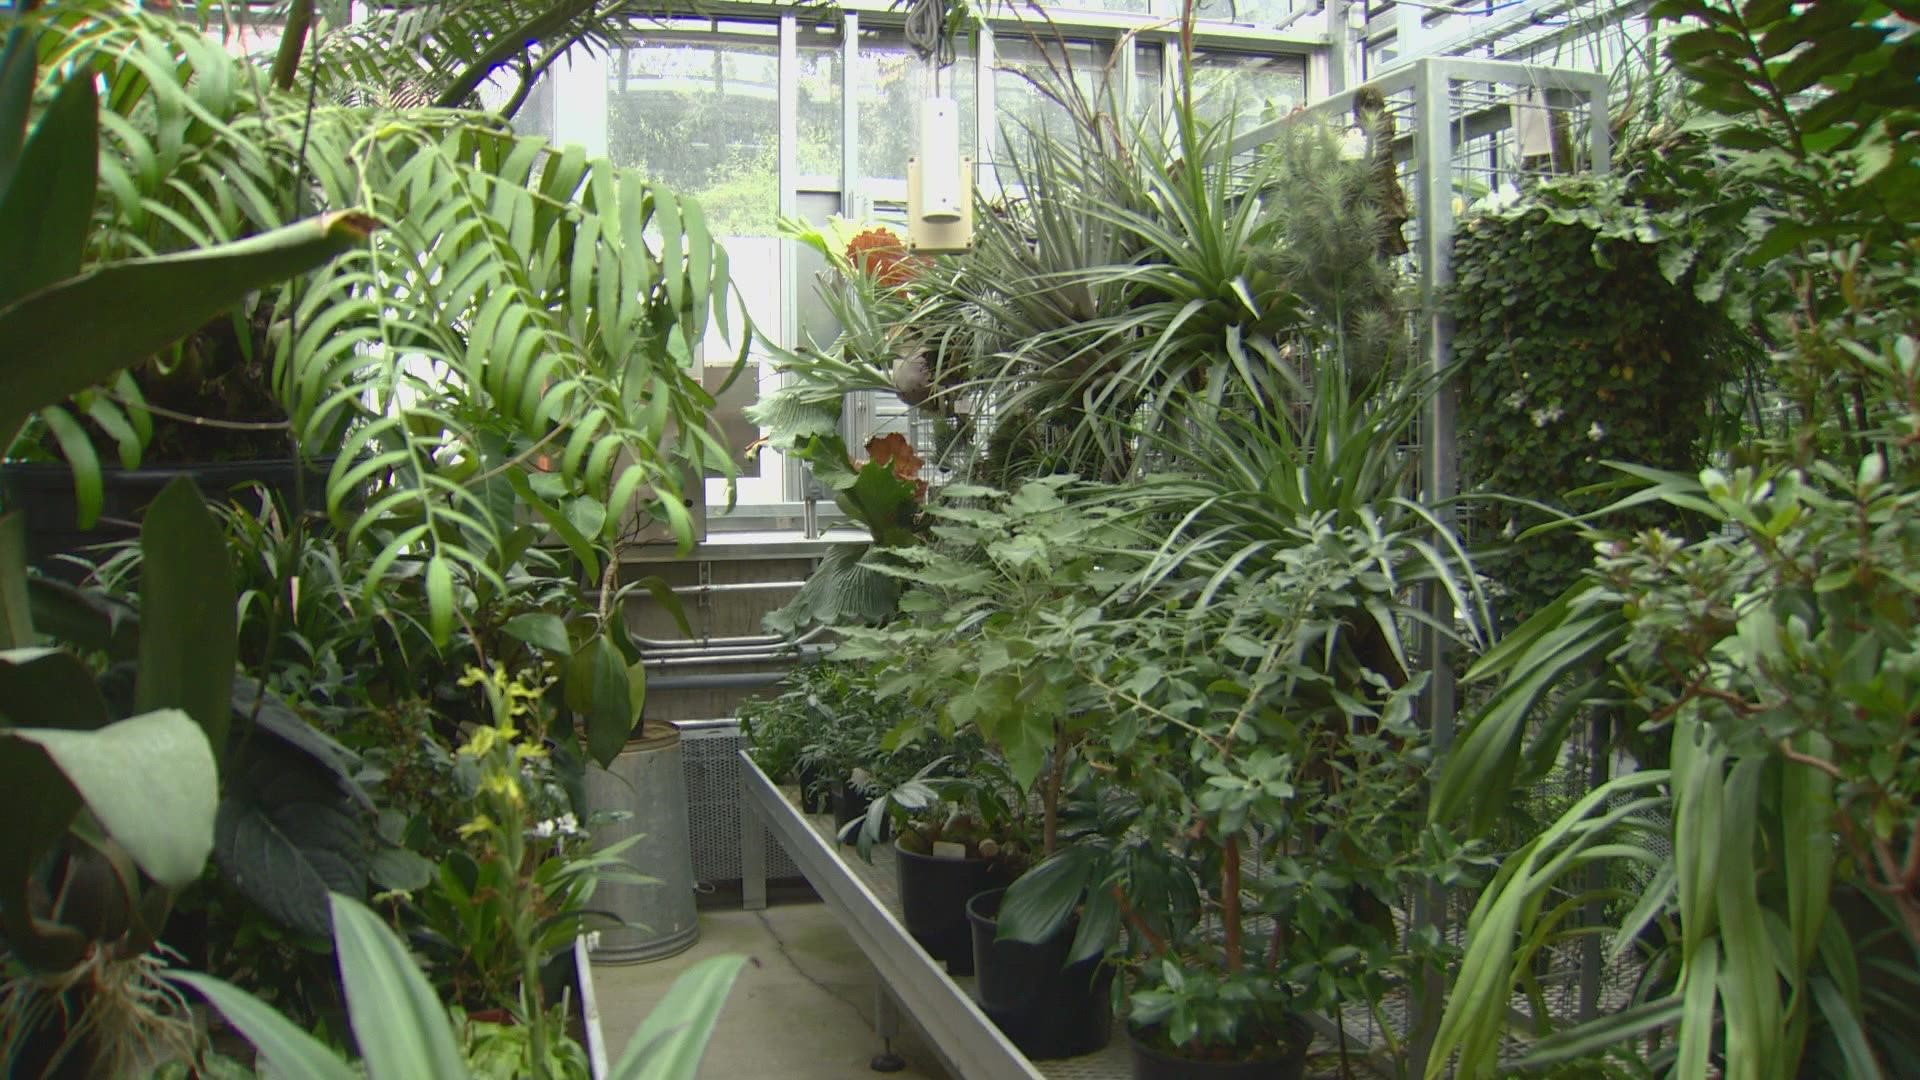 The 20,000 sq ft space contains thousands of species from many different biomes found all over the world